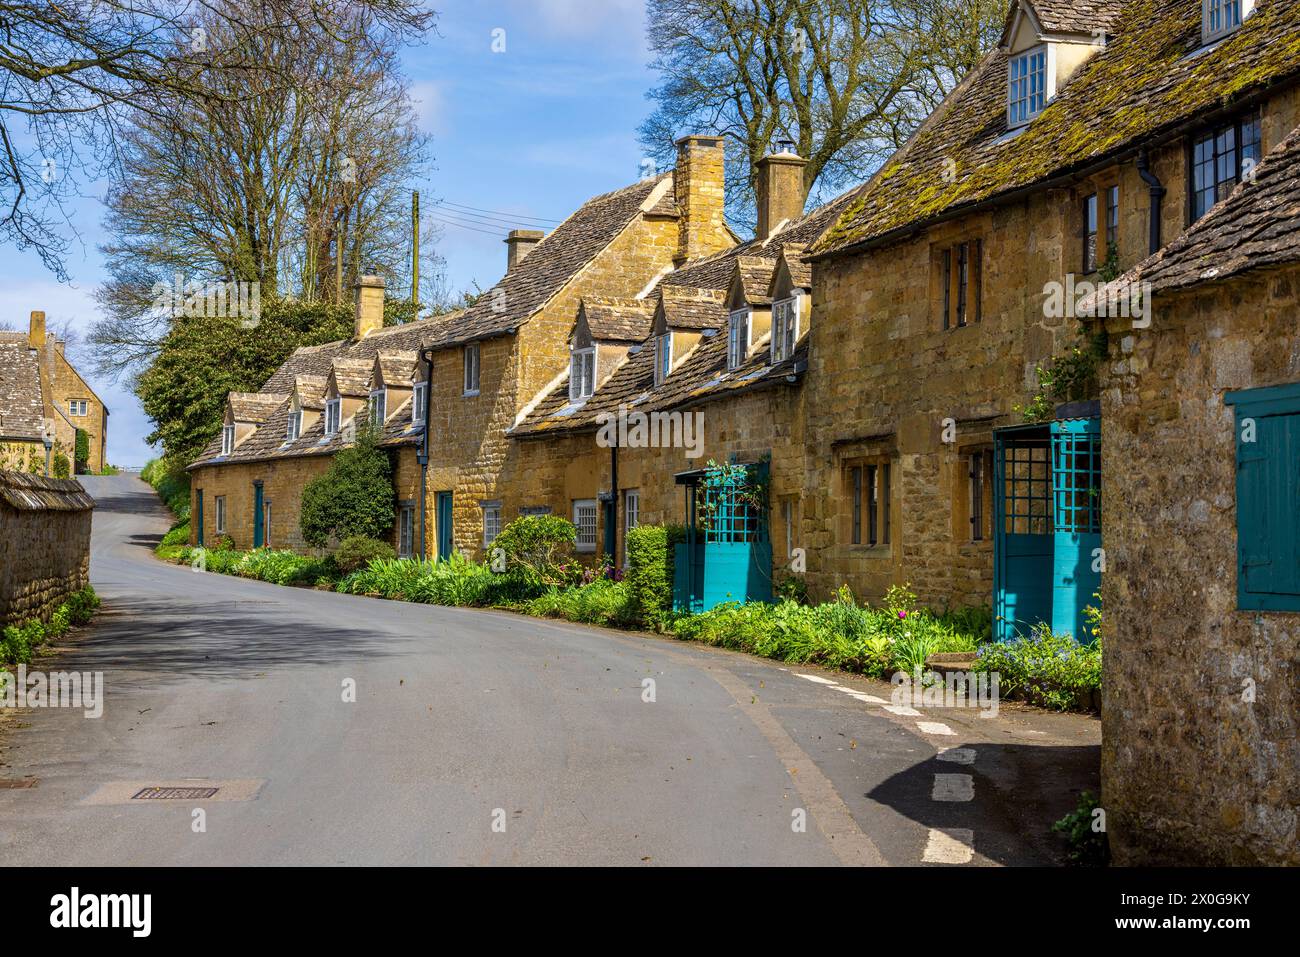 Cotswold Stone Cottages im Dorf Snowshill, Gloucestershire, England Stockfoto